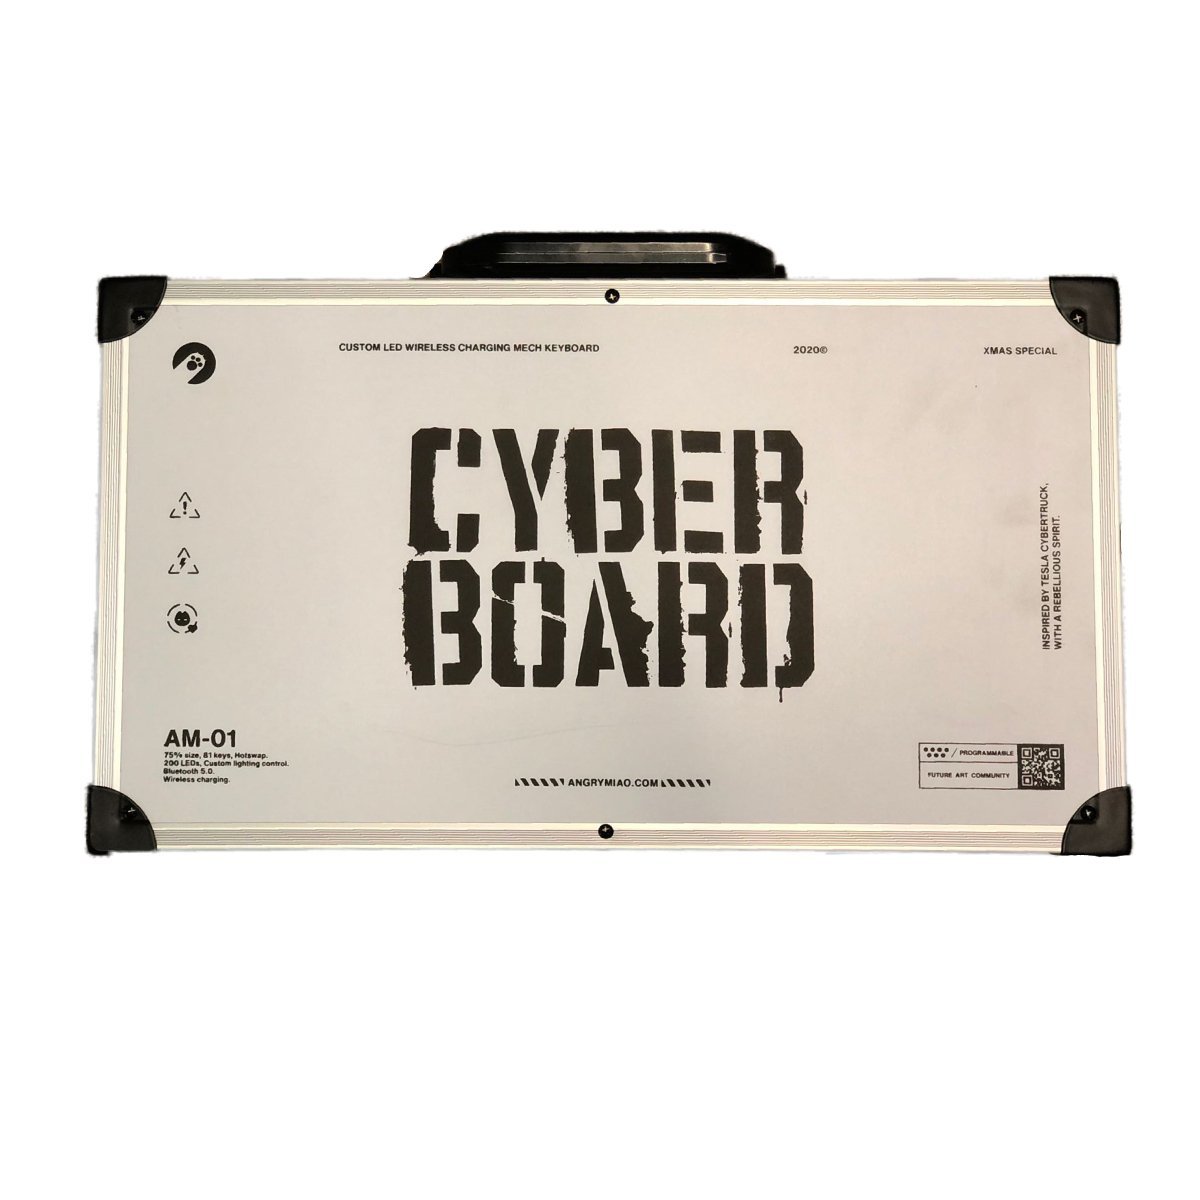 AngryMiao Cyberboard Limited Edition Wireless Charging Mechanical Keyboard- White - Store 974 | ستور ٩٧٤